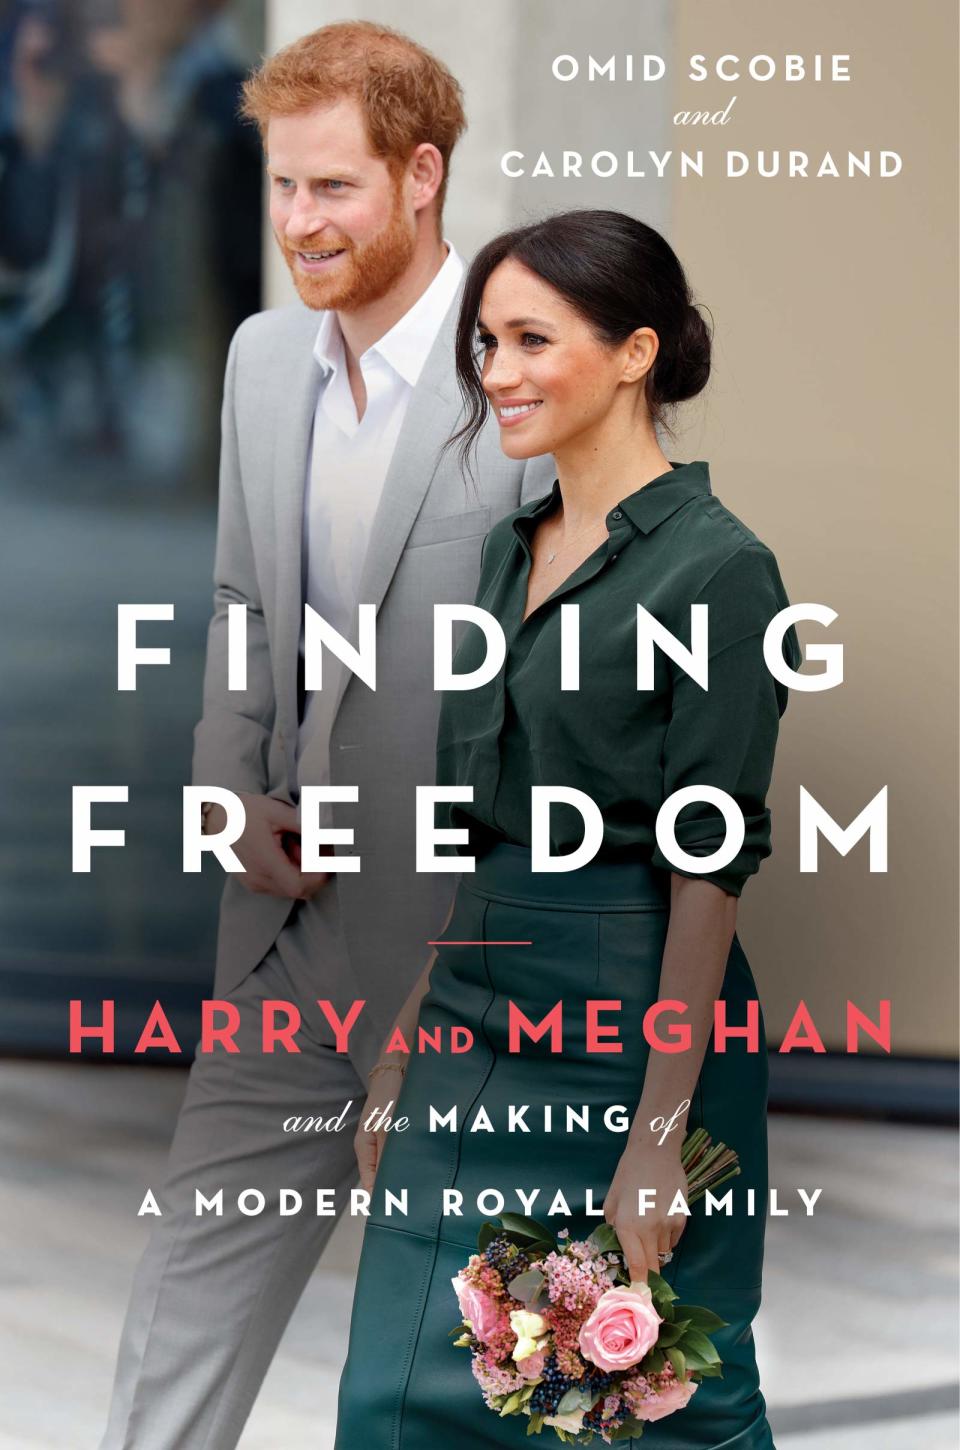 "Finding Freedom: Harry and Meghan and the Making of a Modern Royal Family" by Omid Scobie and Carolyn Durand. Amazon, $27 